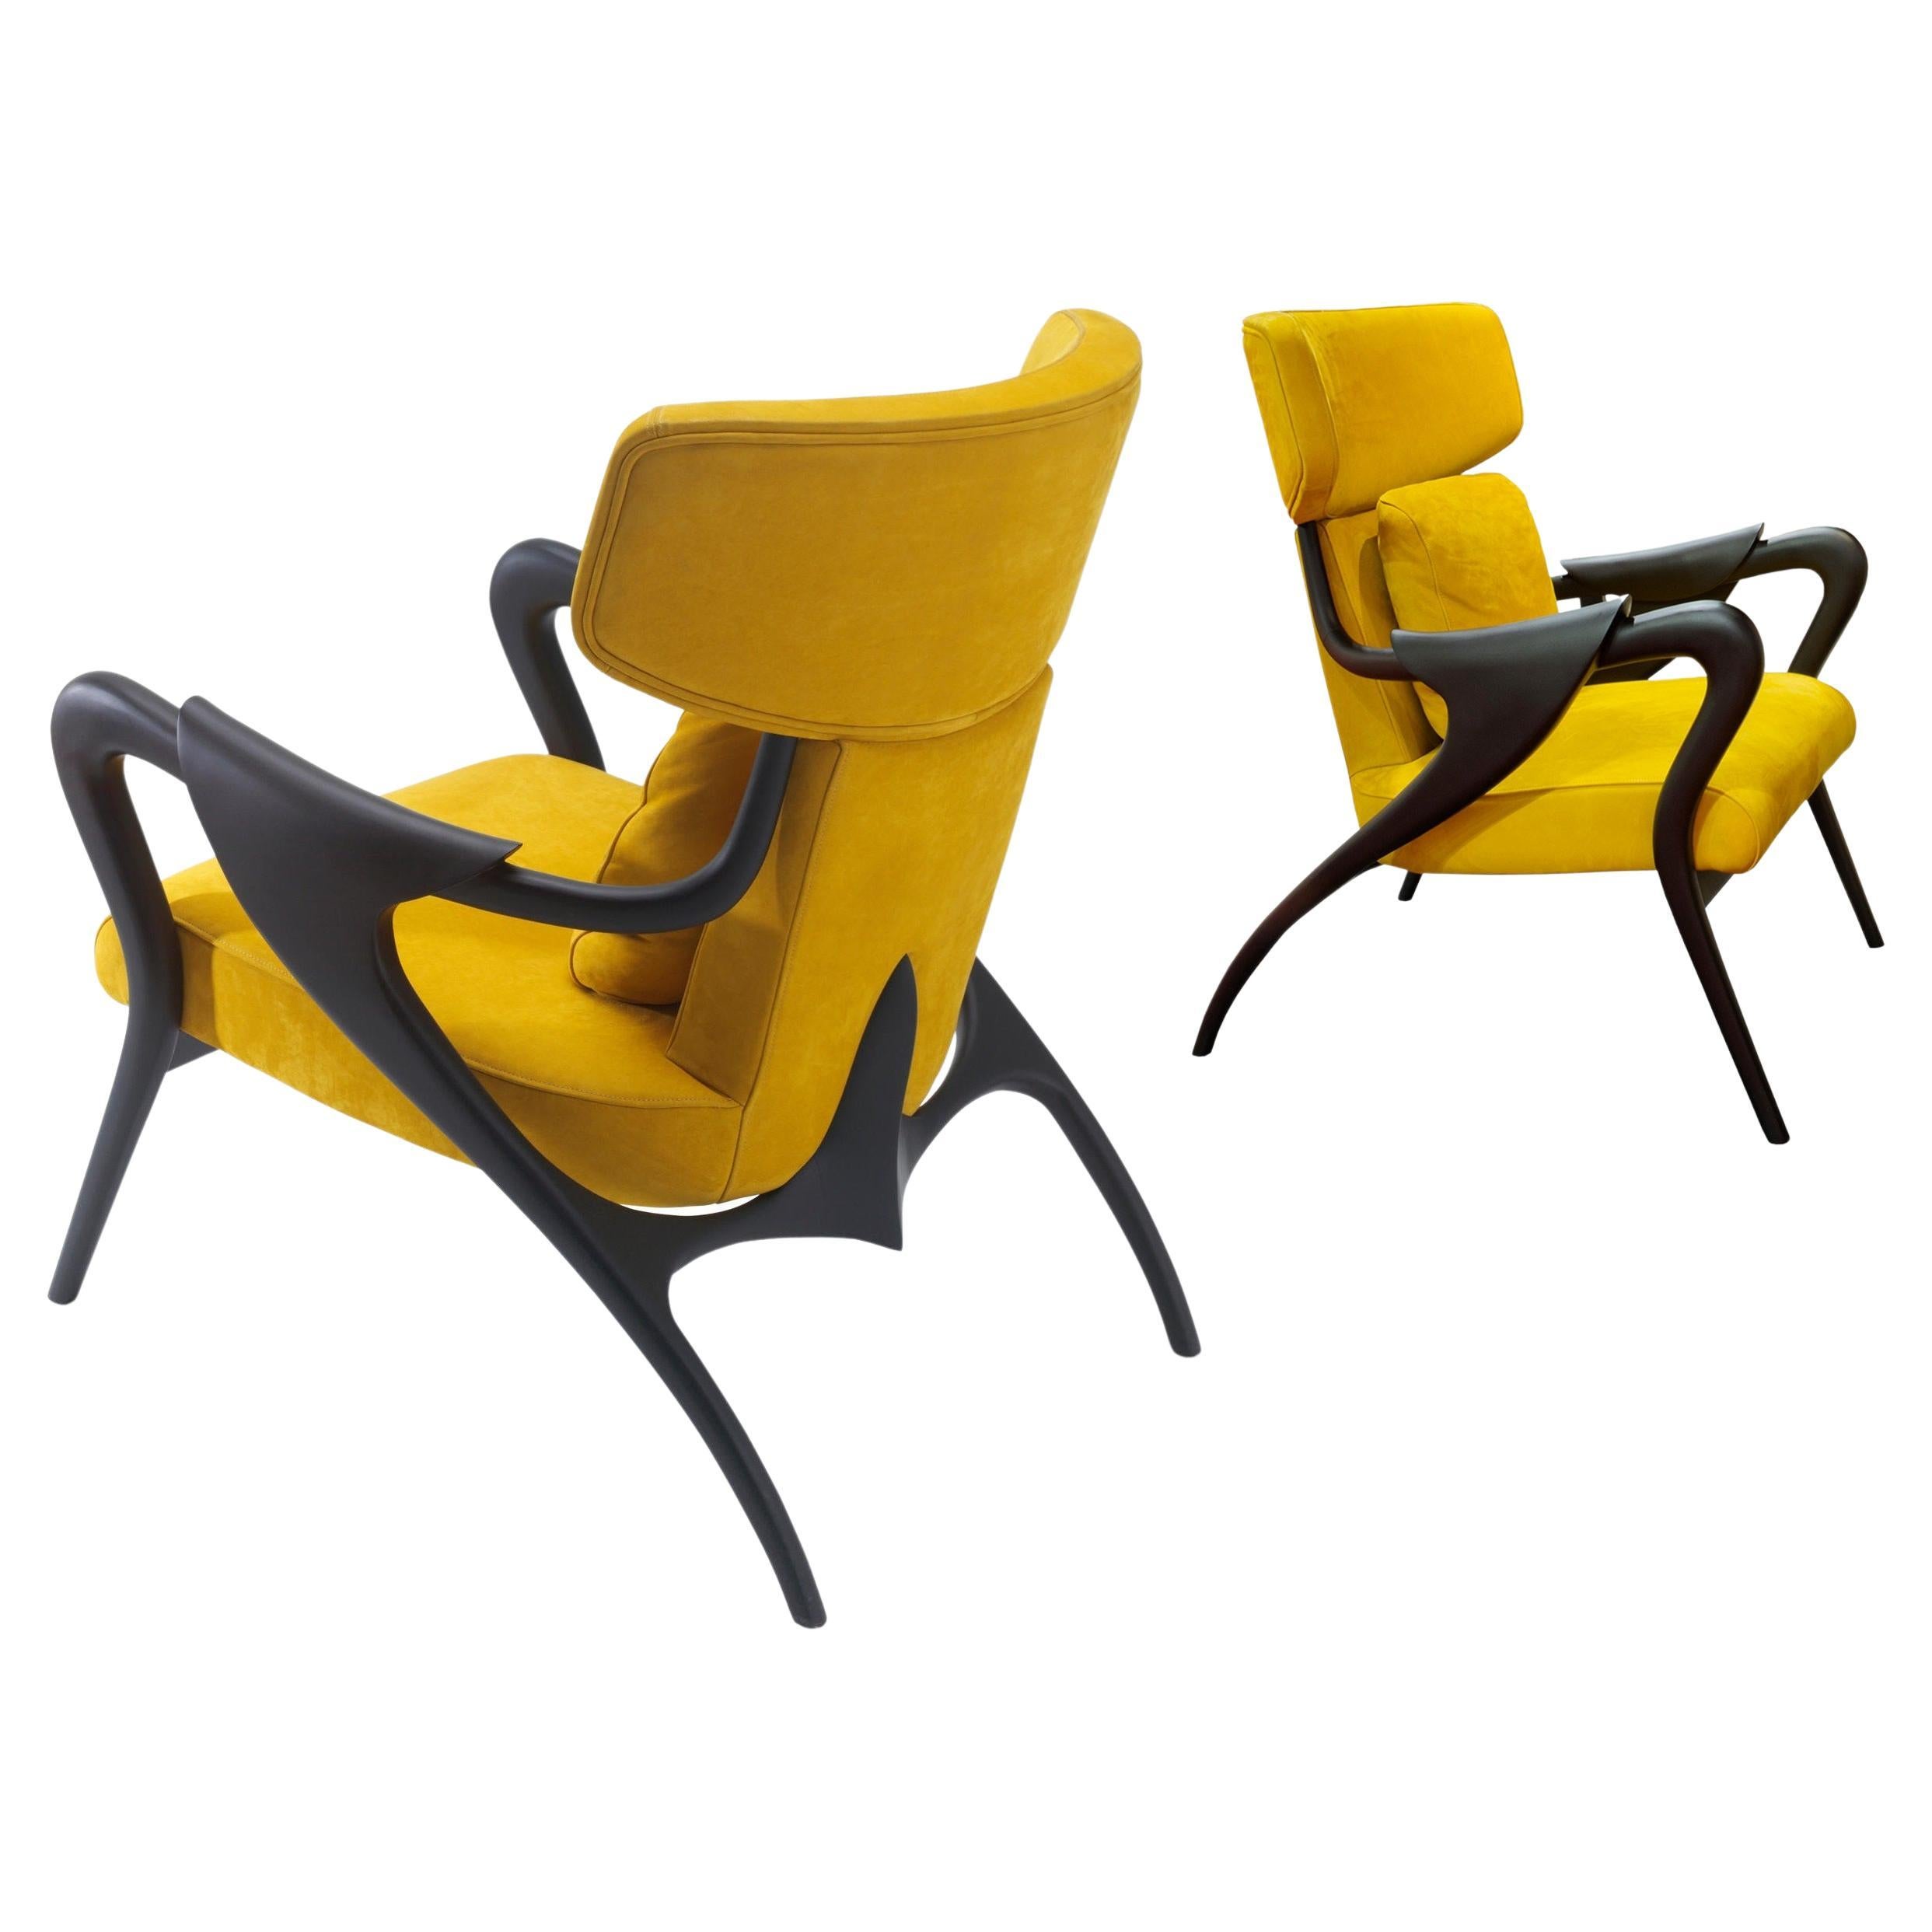 Wingback Sculptural Armchair Made to Order in Nubuck Leather